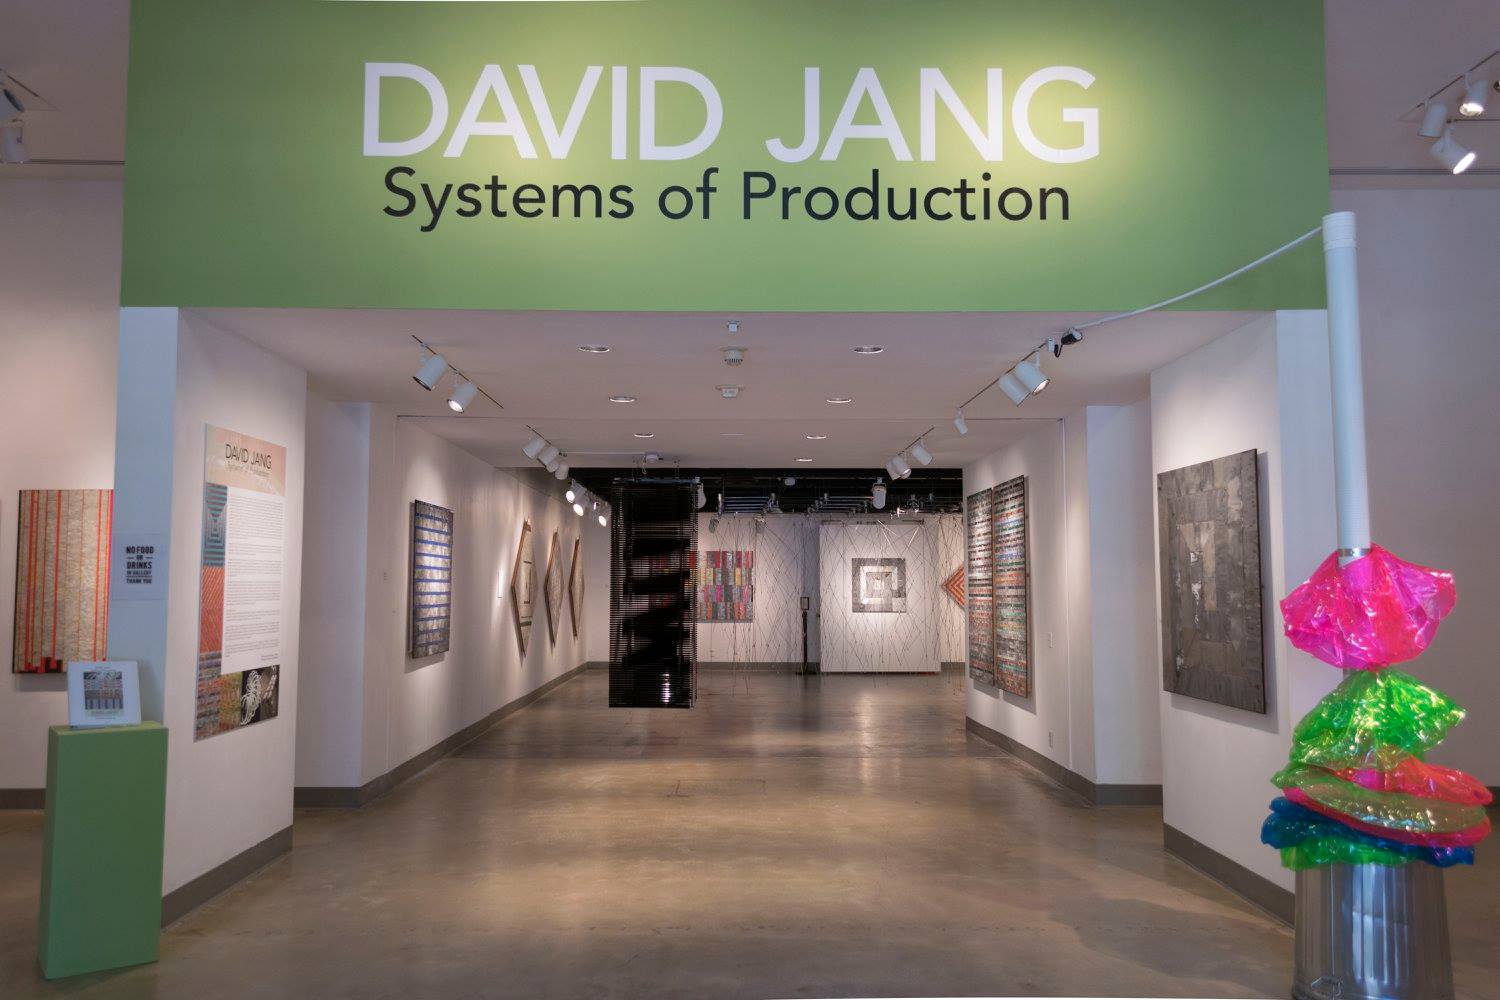 Installation View, Title Wall, David Jang: Systems of Production, Feb 22 - Apr 26, 2018, Curator: Michele Cairella Fillmore, W. Keith & Janet Kellogg Art Gallery, Cal Poly Pomona. [Gallery Shot showing David Jang's dynamic works]